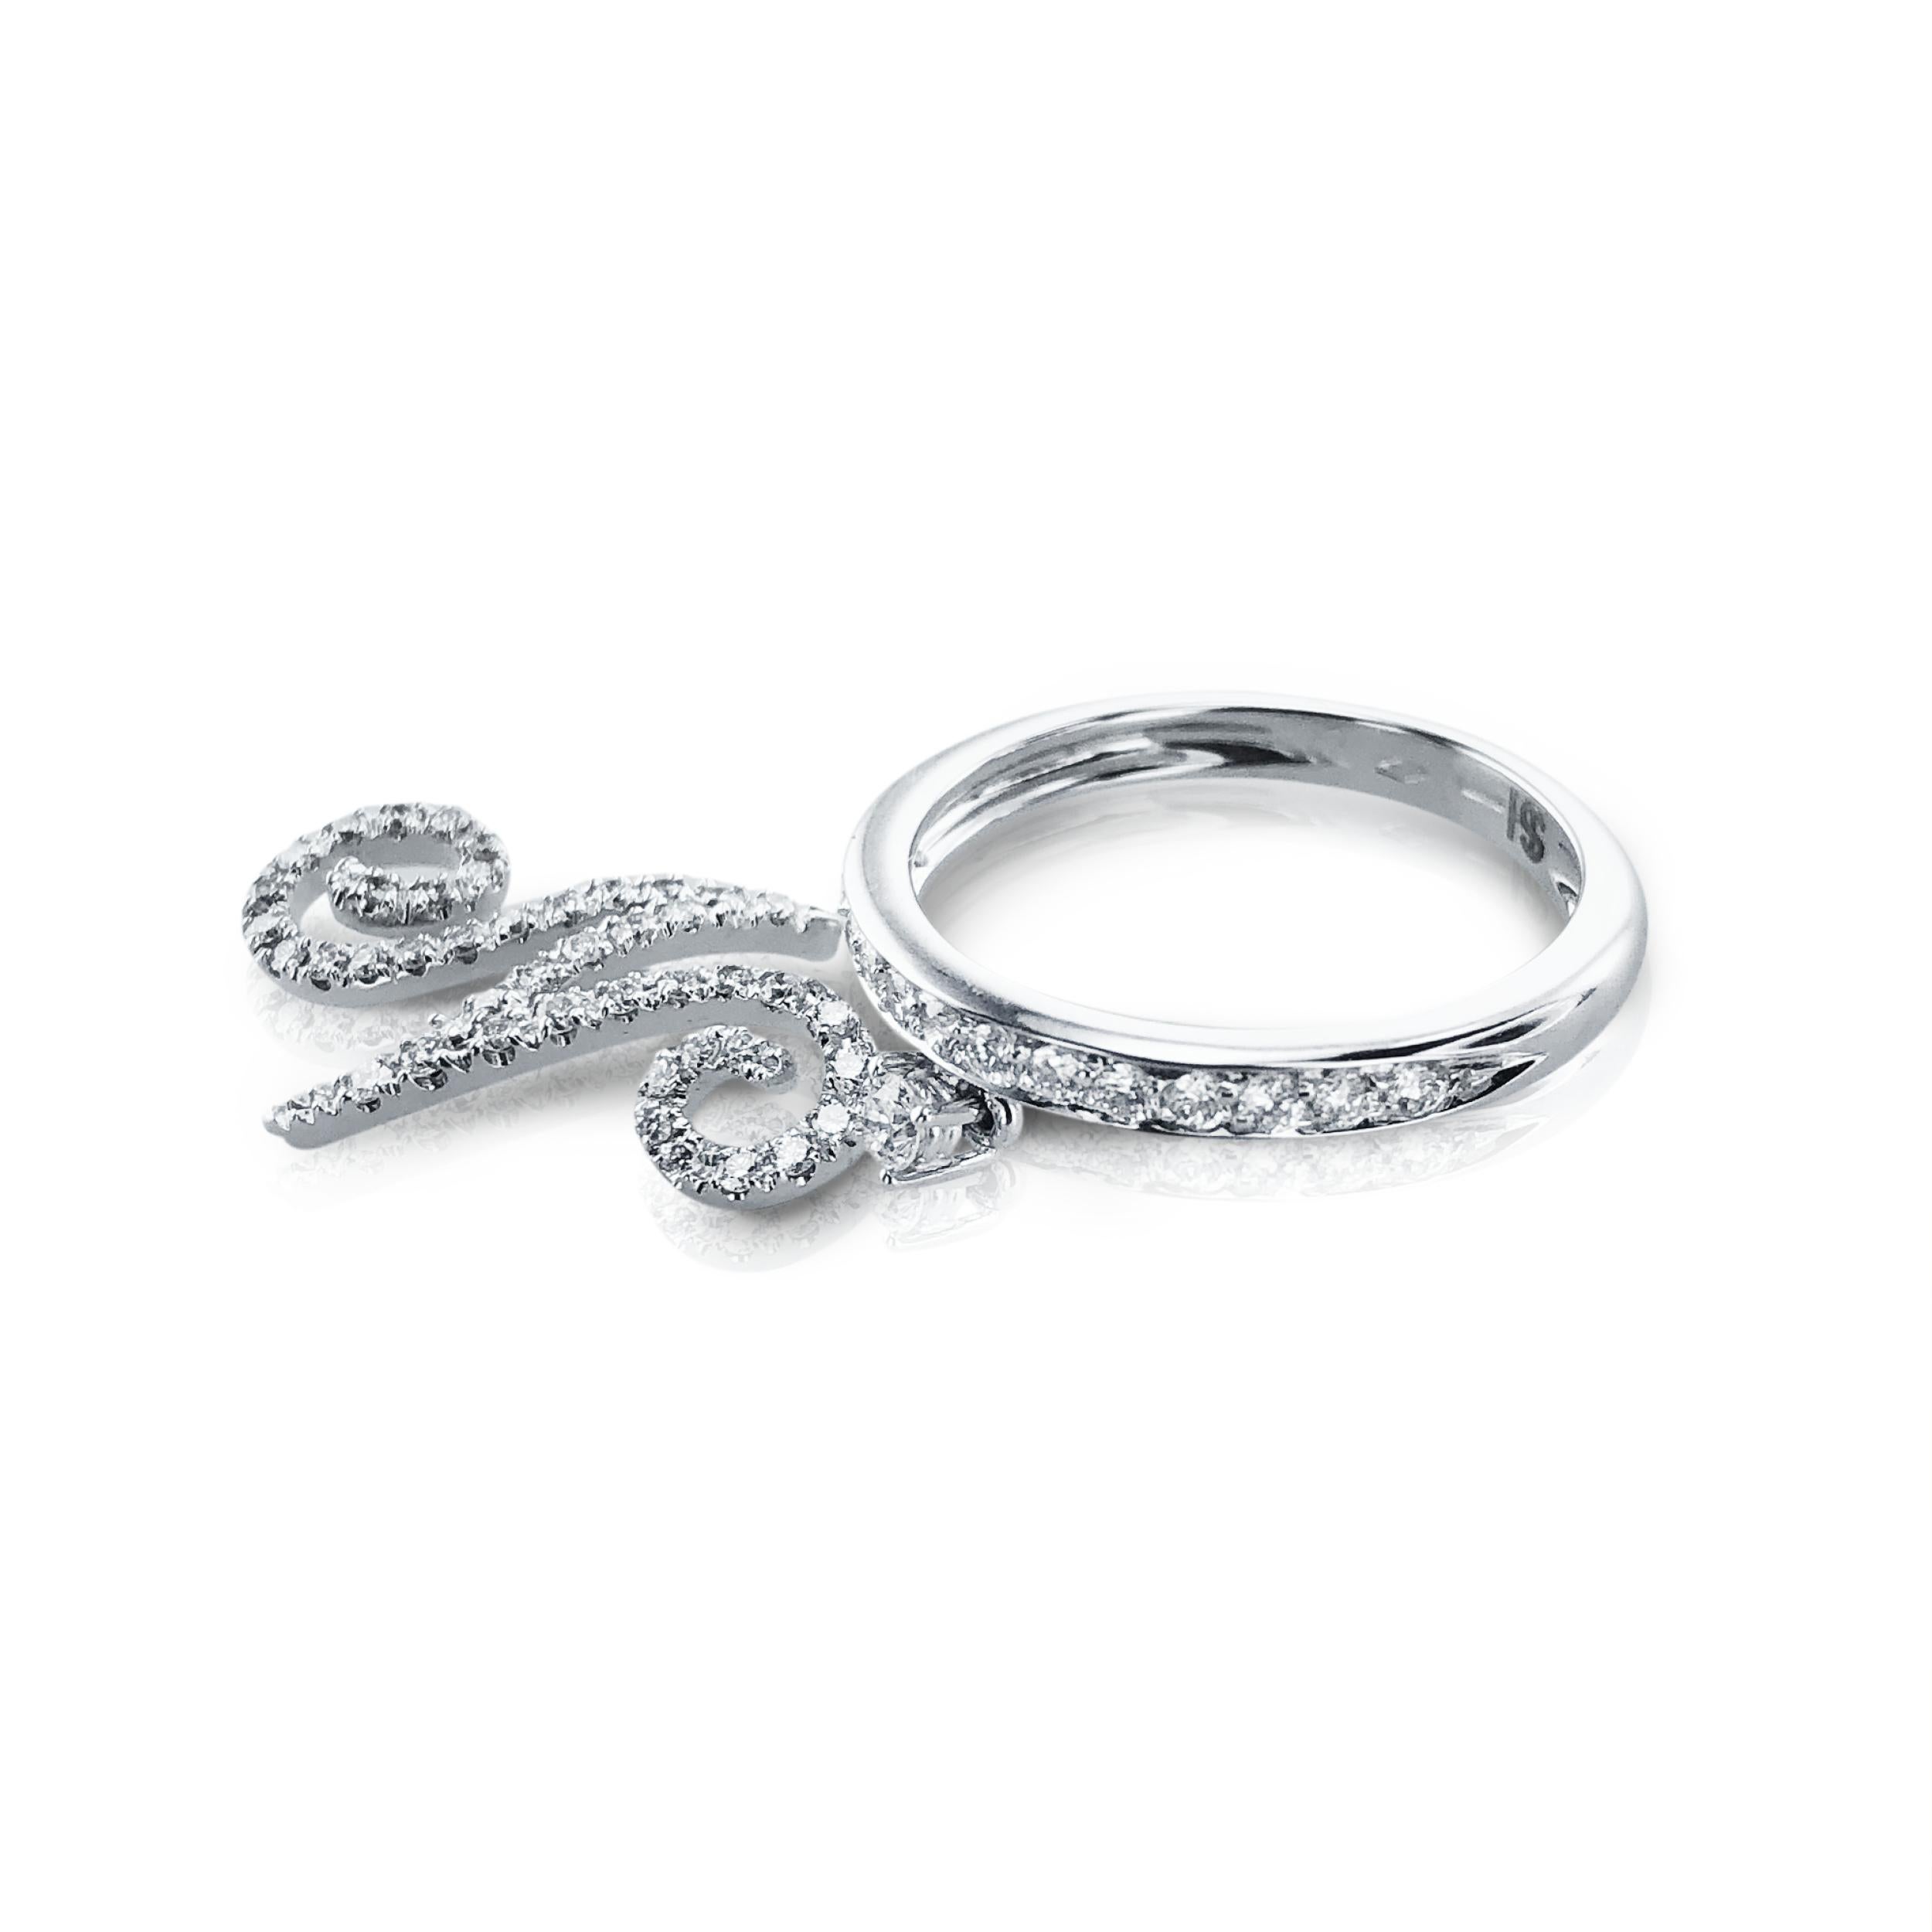 This unique 0.52 Carat Diamond Stefan Hafner Initial 'N' cocktail ring, is initialled with a half Diamond pave dangling 'N' (2cm in length). 

The perfect ring for anyone whose name begins with the letter N, or if the letter holds a sentimental